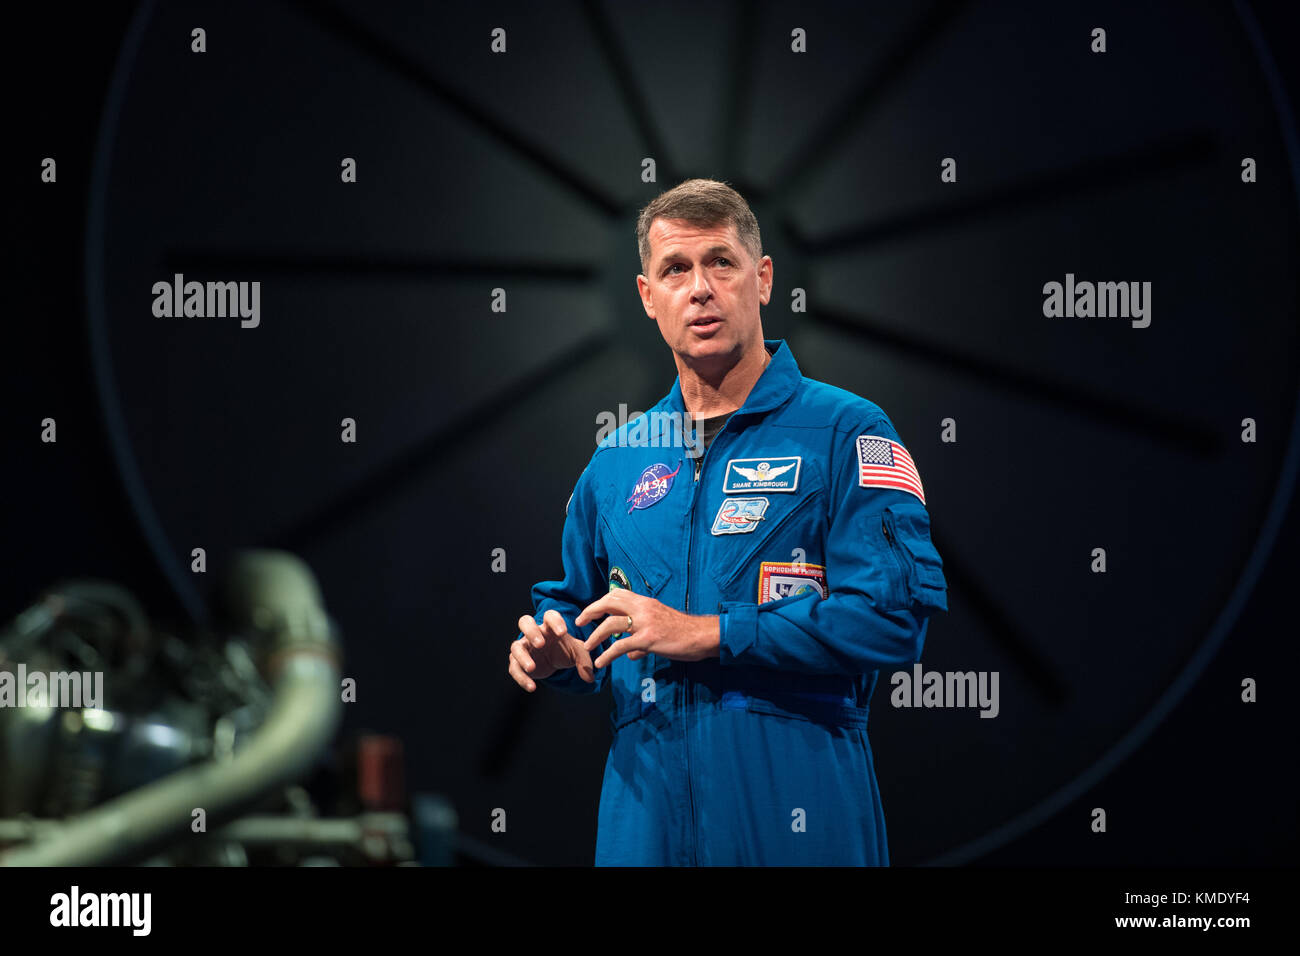 NASA astronaut Shane Kimbrough speaks about his time aboard the International Space Station during Expedition 49 and Expedition 50 at the Smithsonian National Air and Space Museum September 12, 2017 in Washington, DC. (photo by Aubrey Gemignani  via Planetpix) Stock Photo